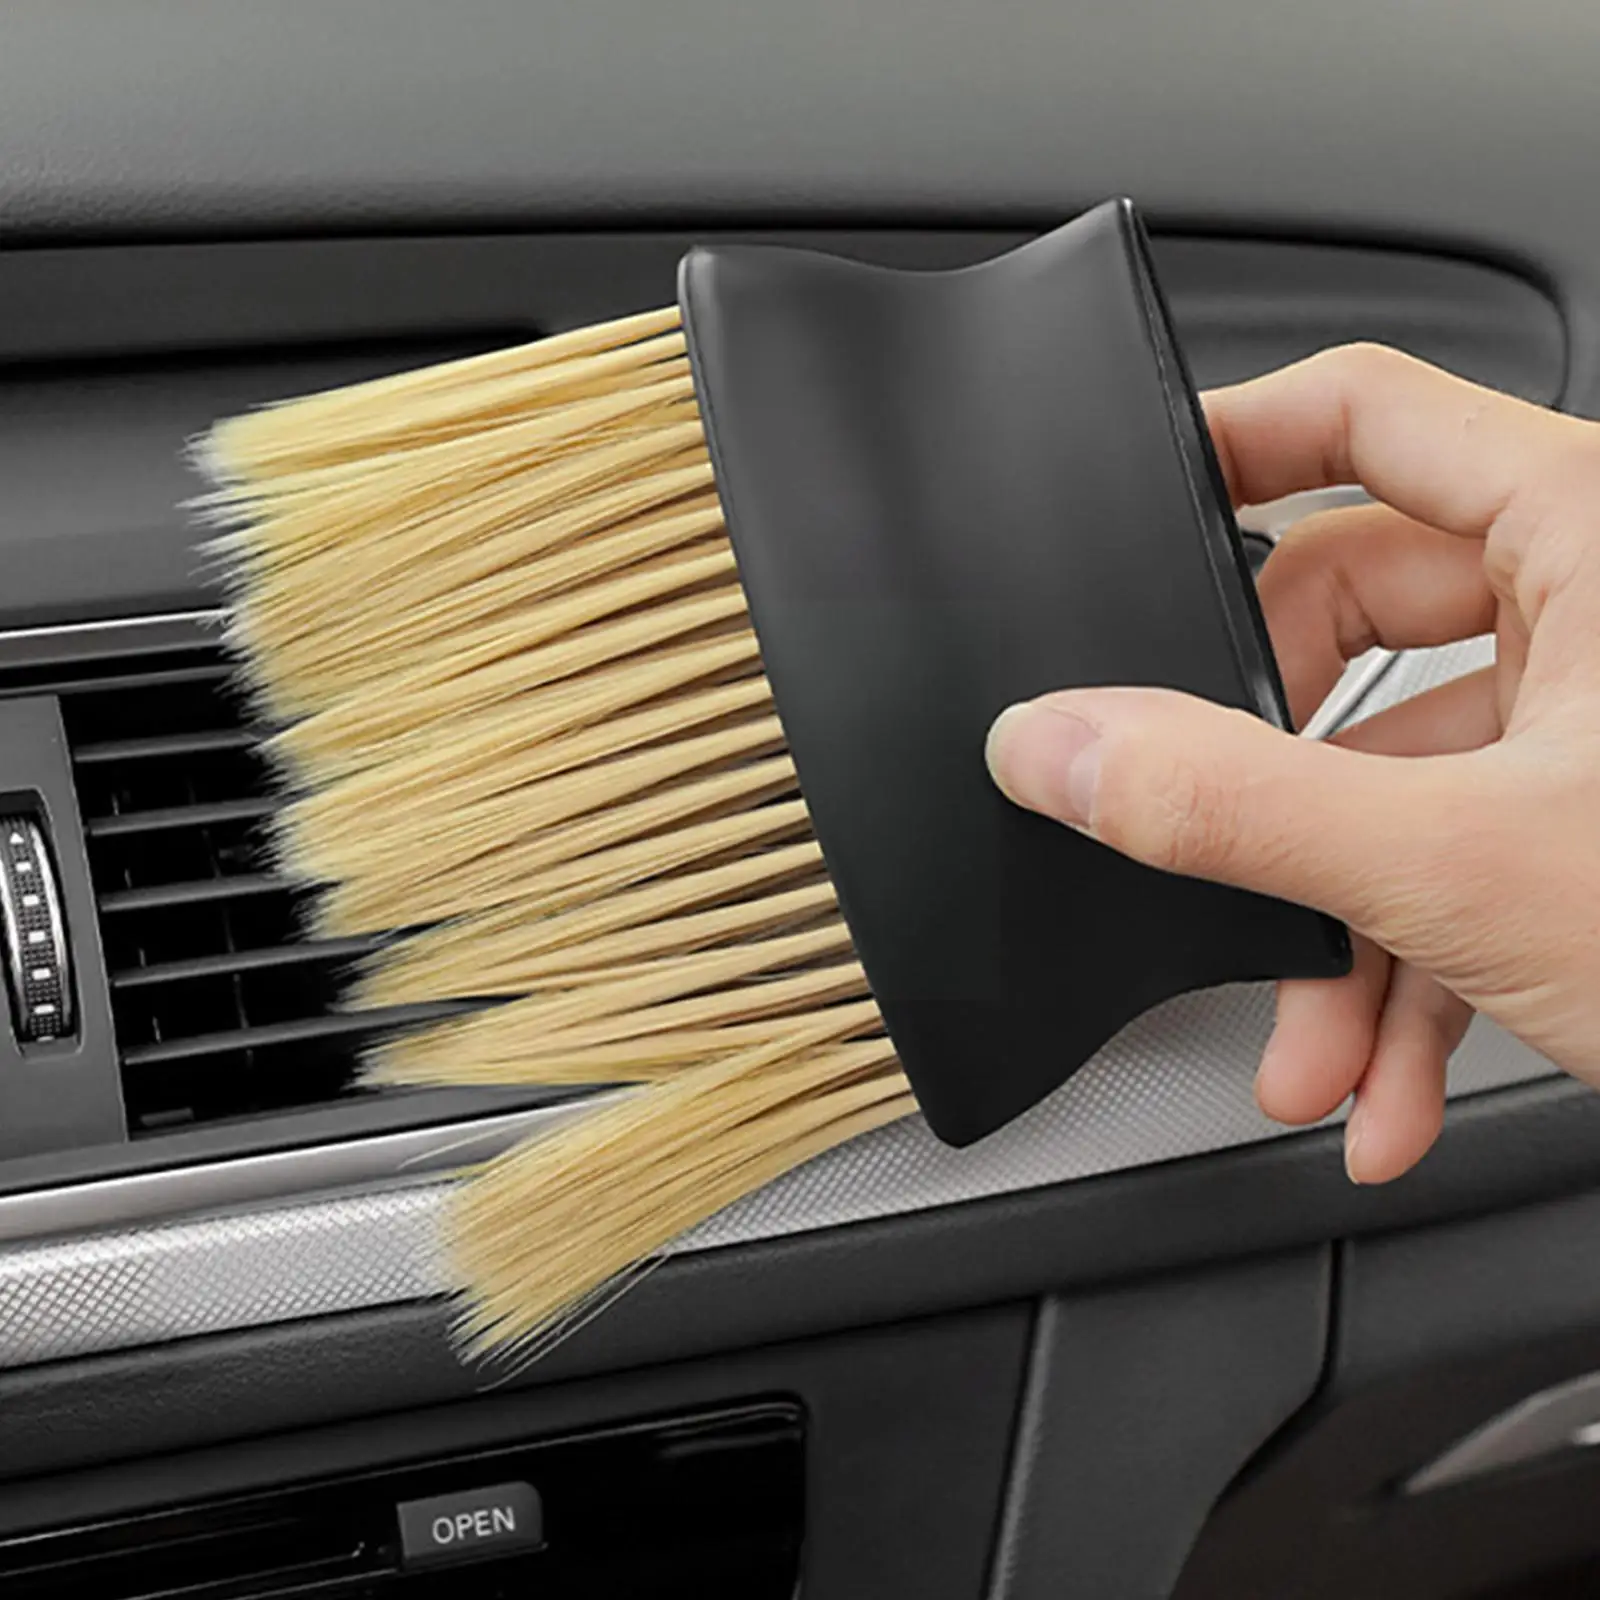 

Car Interior Dust Brush Car Cleaning Brushes Duster, Soft Bristles Detailing Brush Tool For Car Dashboard Air Conditioner V S8D1